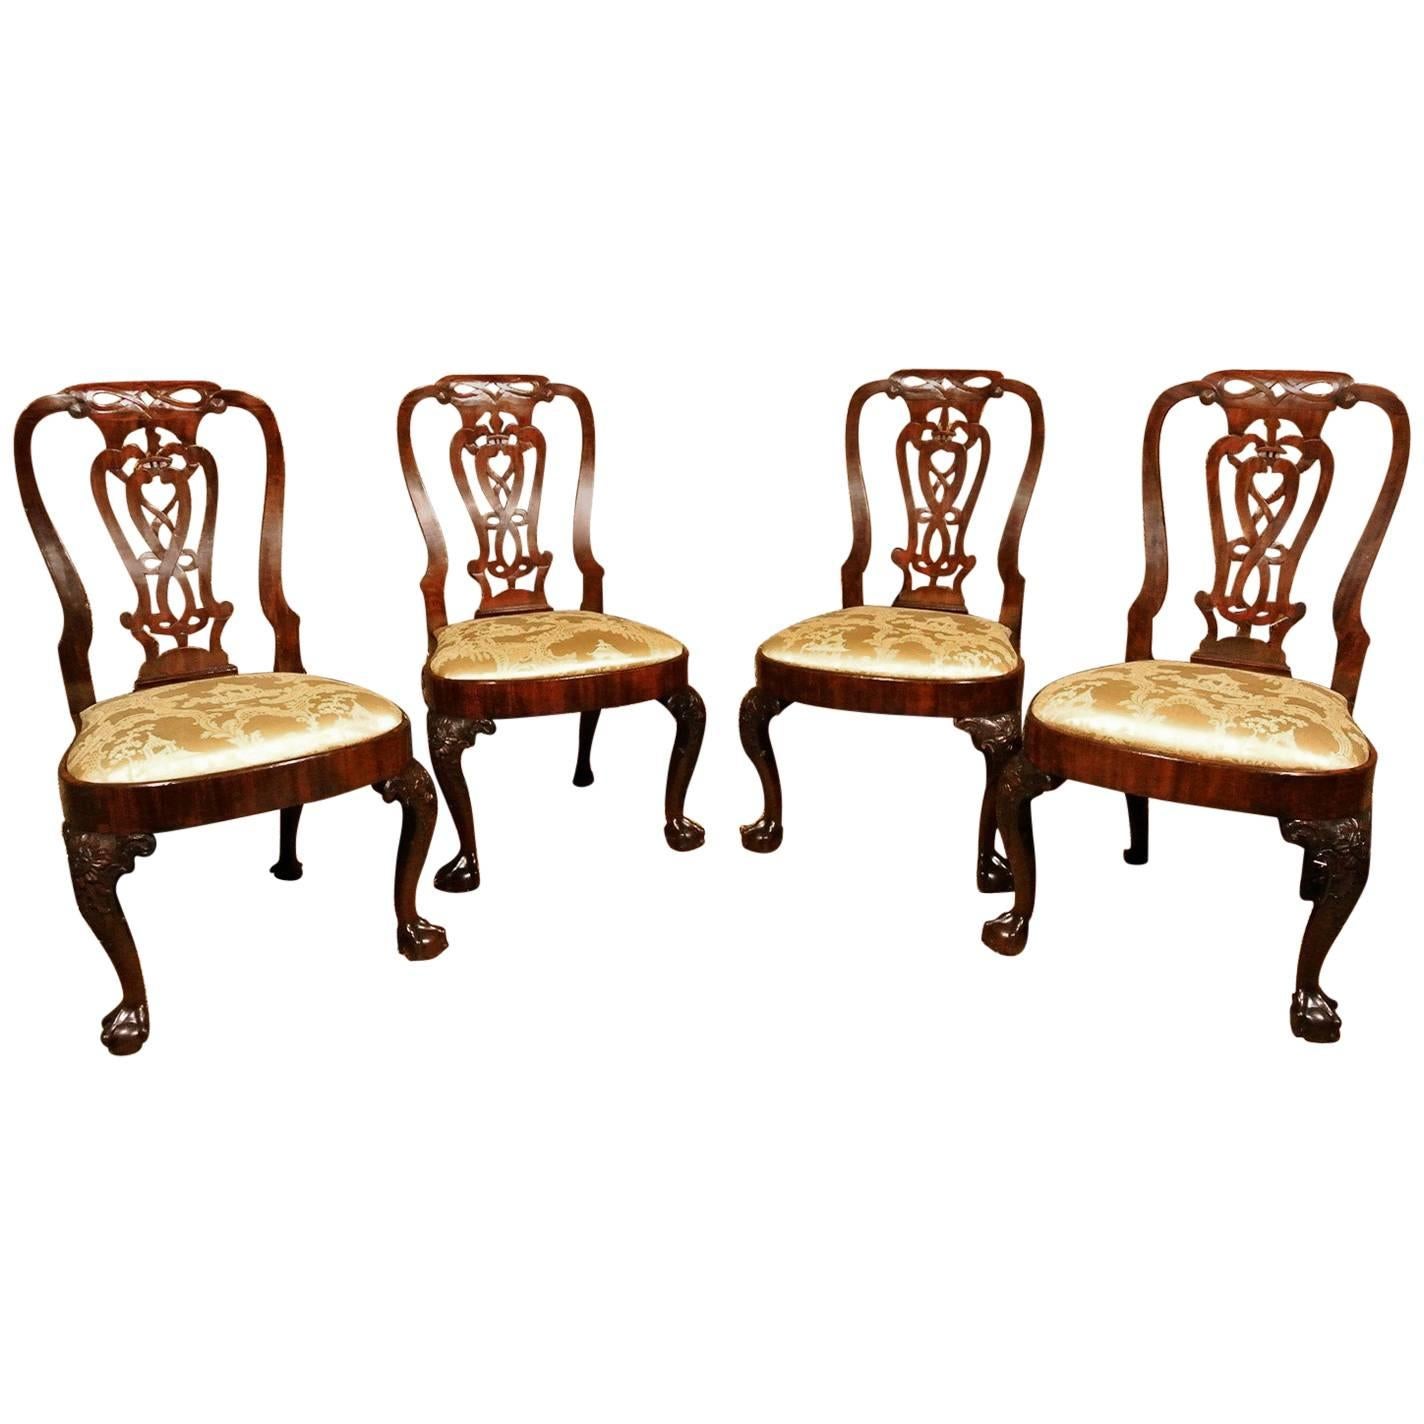 Exceptional Set of George III Irish Mahogany Dining Chairs, circa 1760 For Sale